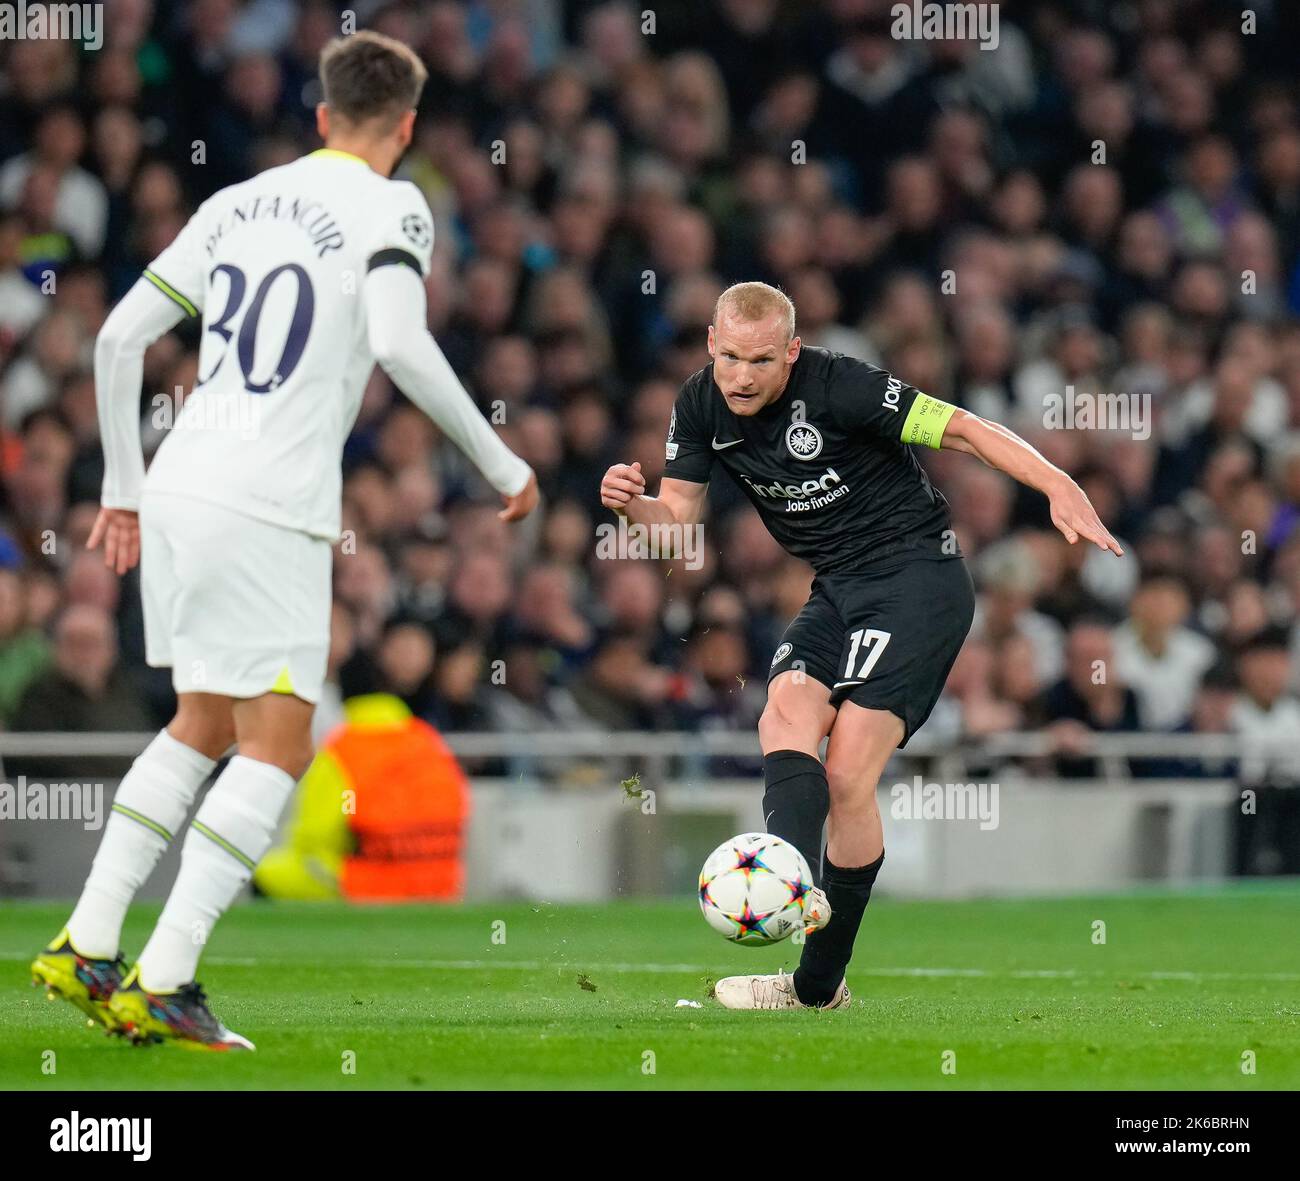 White Hart Lane, UK. 12th Sep, 2022. Sebastian Rode (17) of Eintracht Frankfurt (right) during the UEFA Champions League match between Tottenham Hotspur and Eintracht Frankfurt at Tottenham Hotspur Stadium, White Hart Lane, England on 12 October 2022. Photo by David Horn. Credit: PRiME Media Images/Alamy Live News Stock Photo